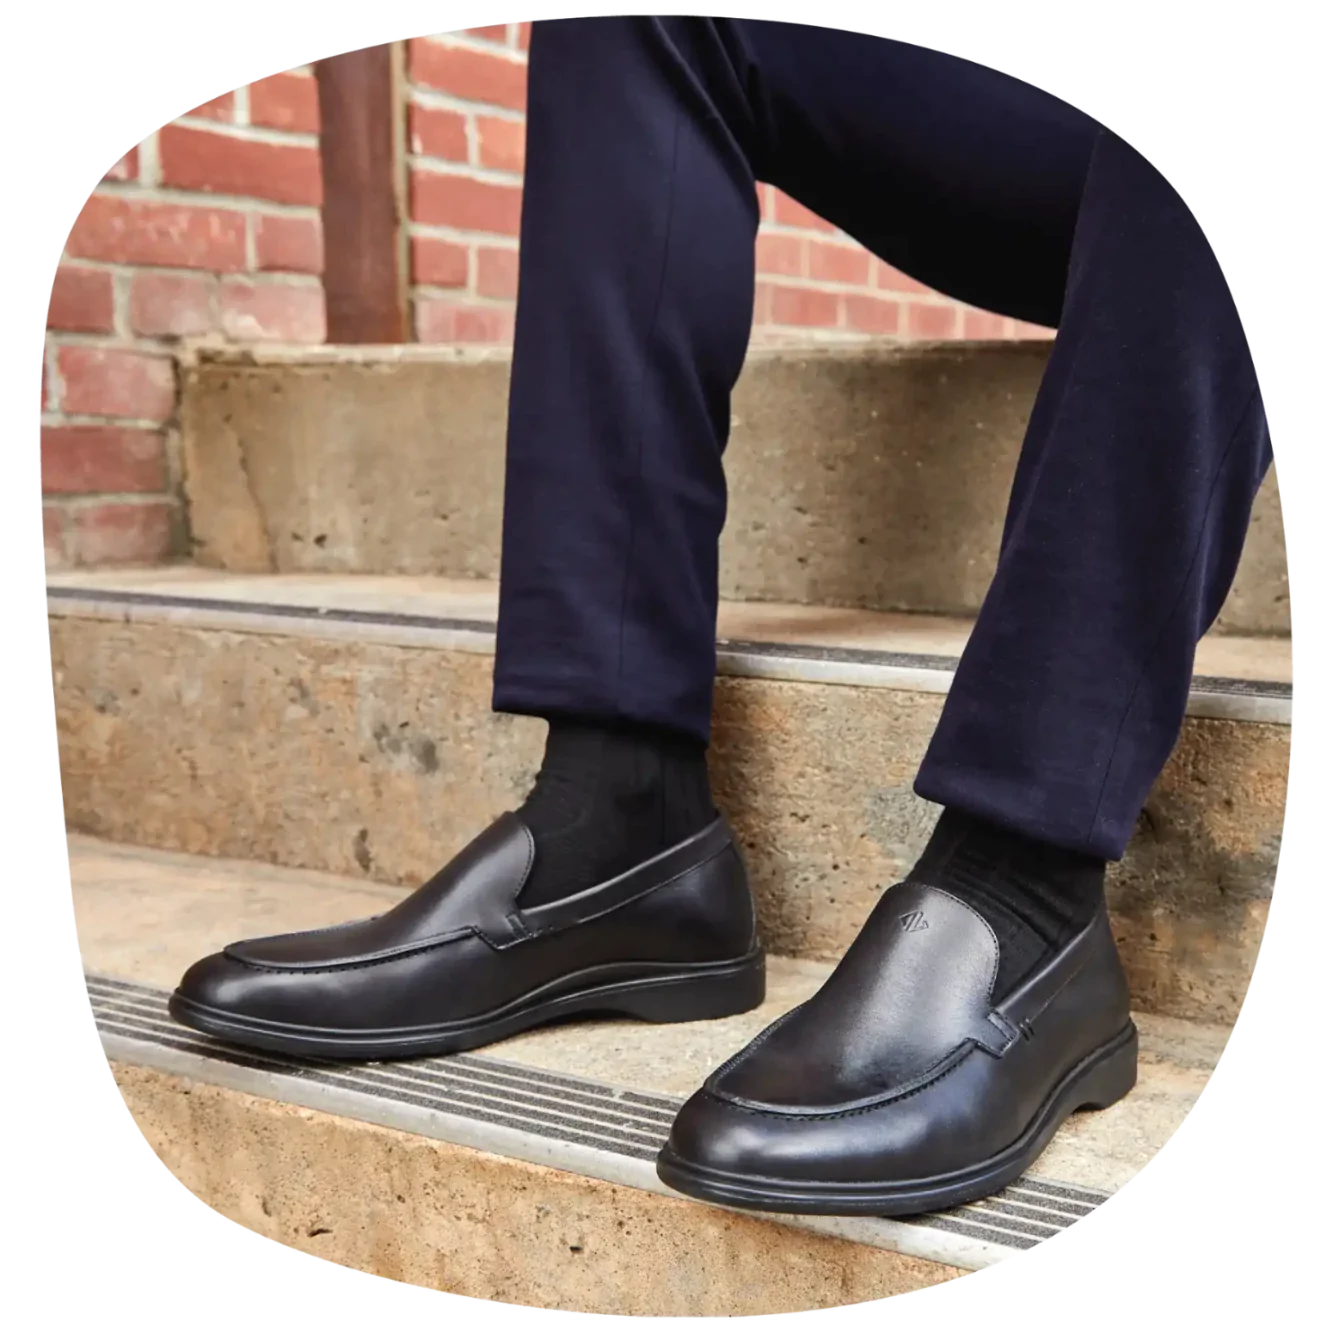 The Loafer in Obsidian from Amberjack